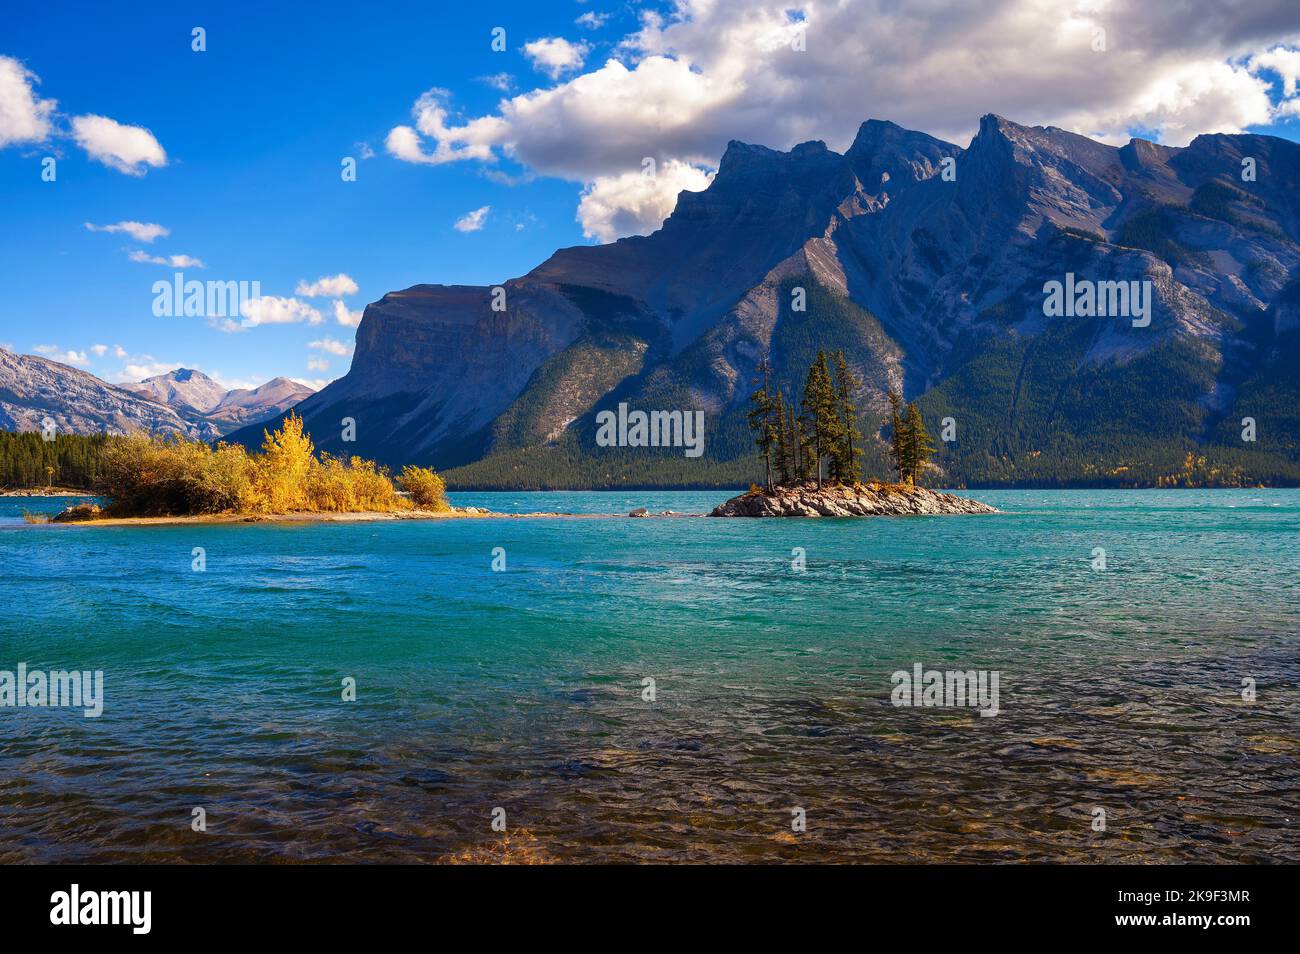 Small island with trees on Lake Minnewanka in Banff National Park, Canada Stock Photo